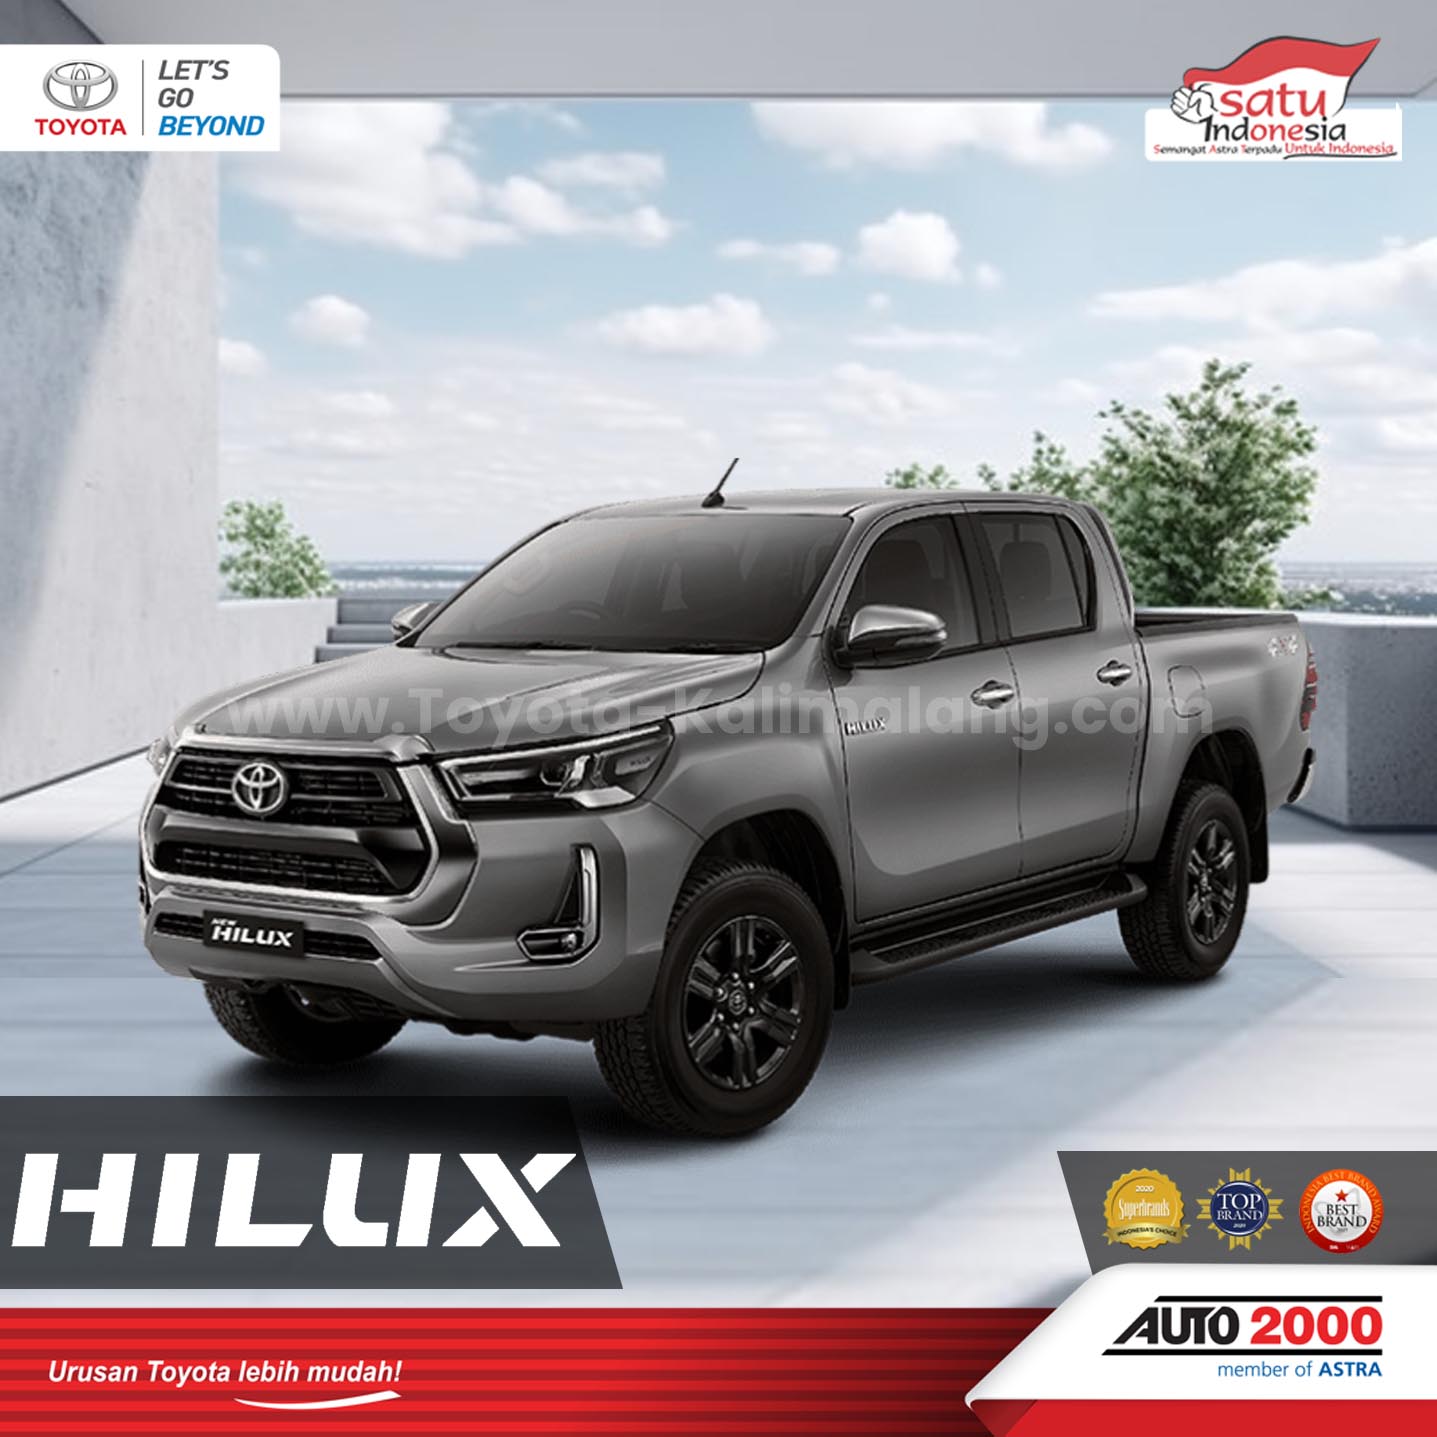 Hilux Homepage Toyota Kalimalang